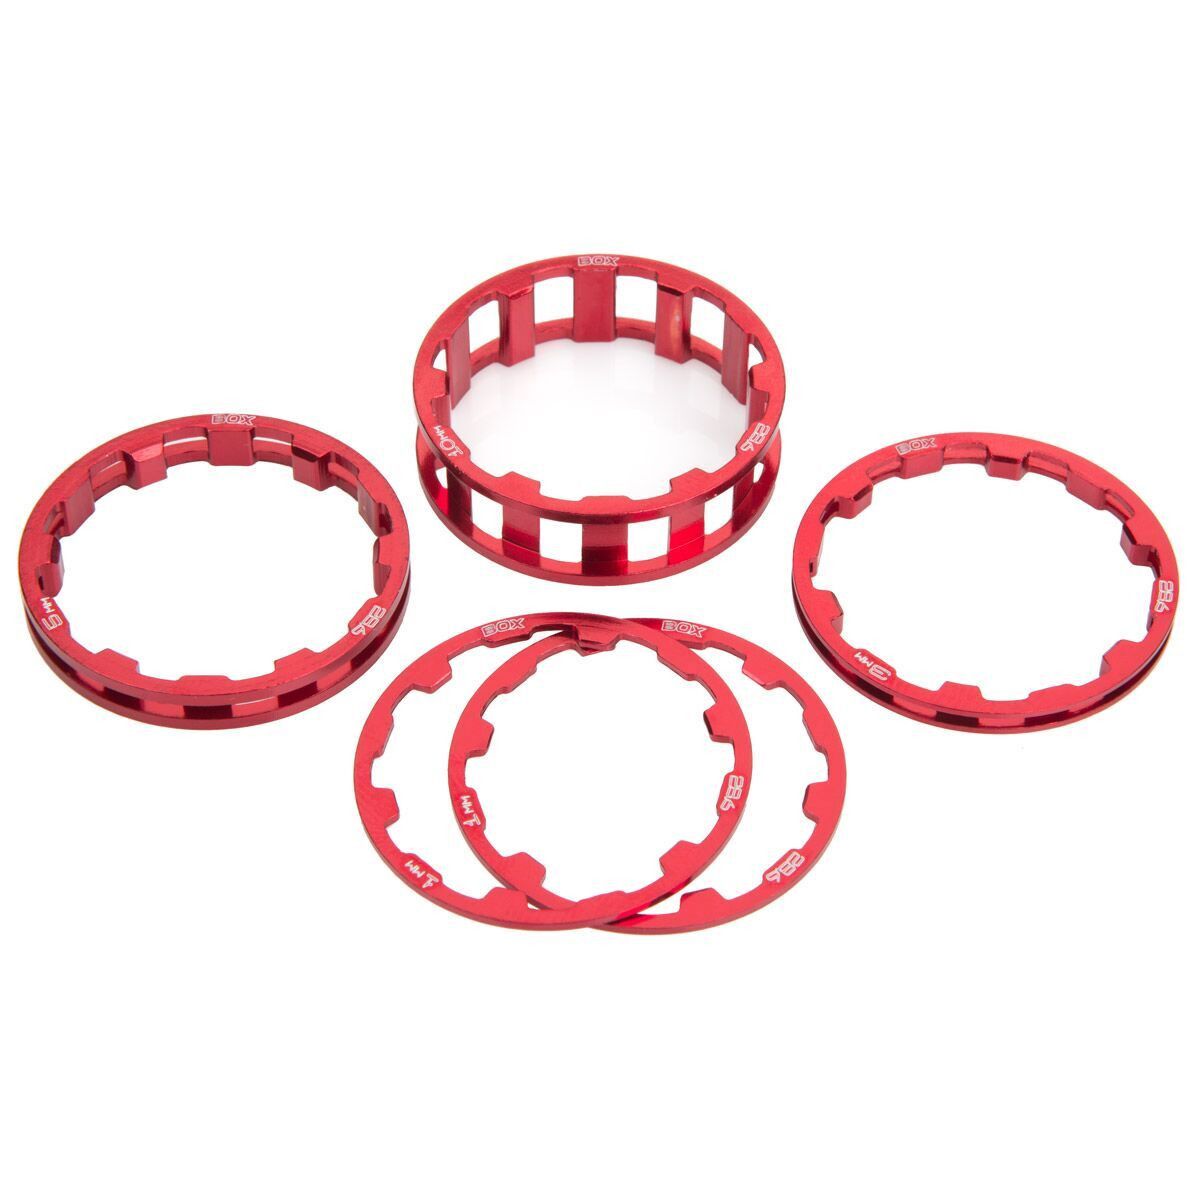 BOX ONE SPACERS PACK 1-1/8"